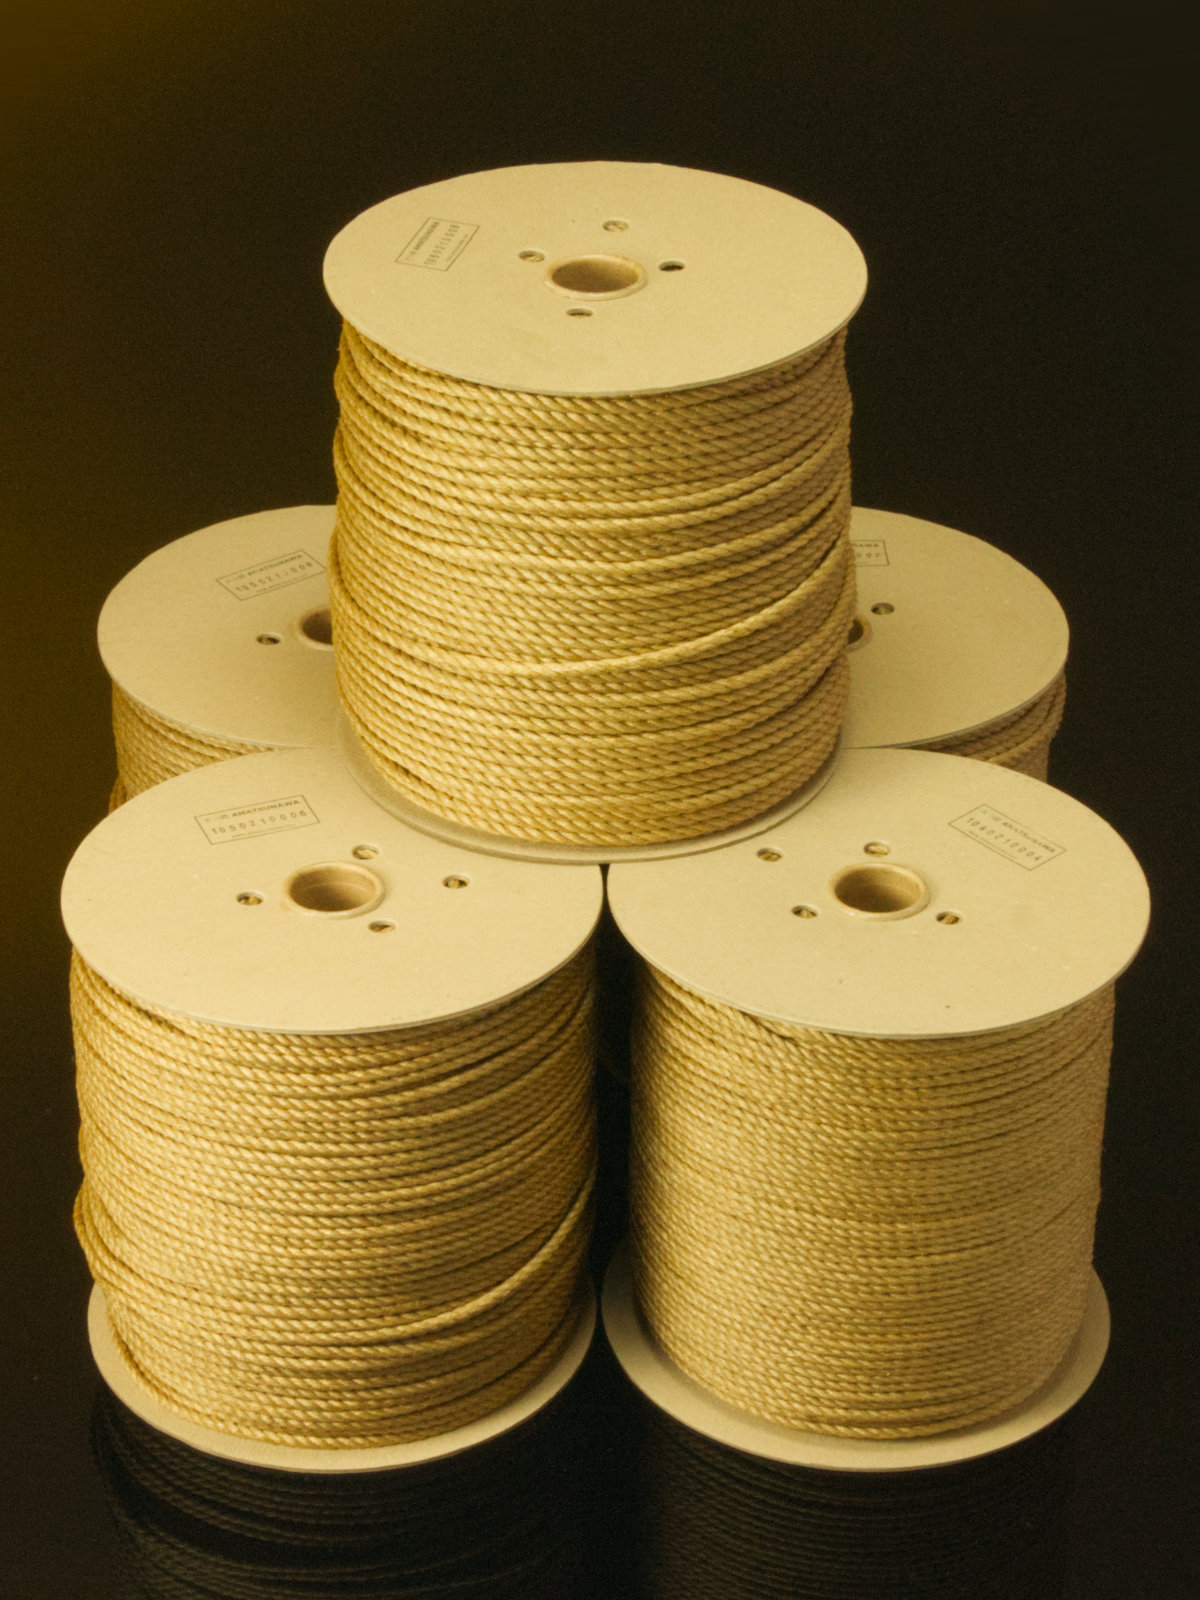 ∅ 6mm JOUYOKU MAXI-ROLL, ~6kg, 300m, ready-for-use Japanese-made jute rope, JBO-free